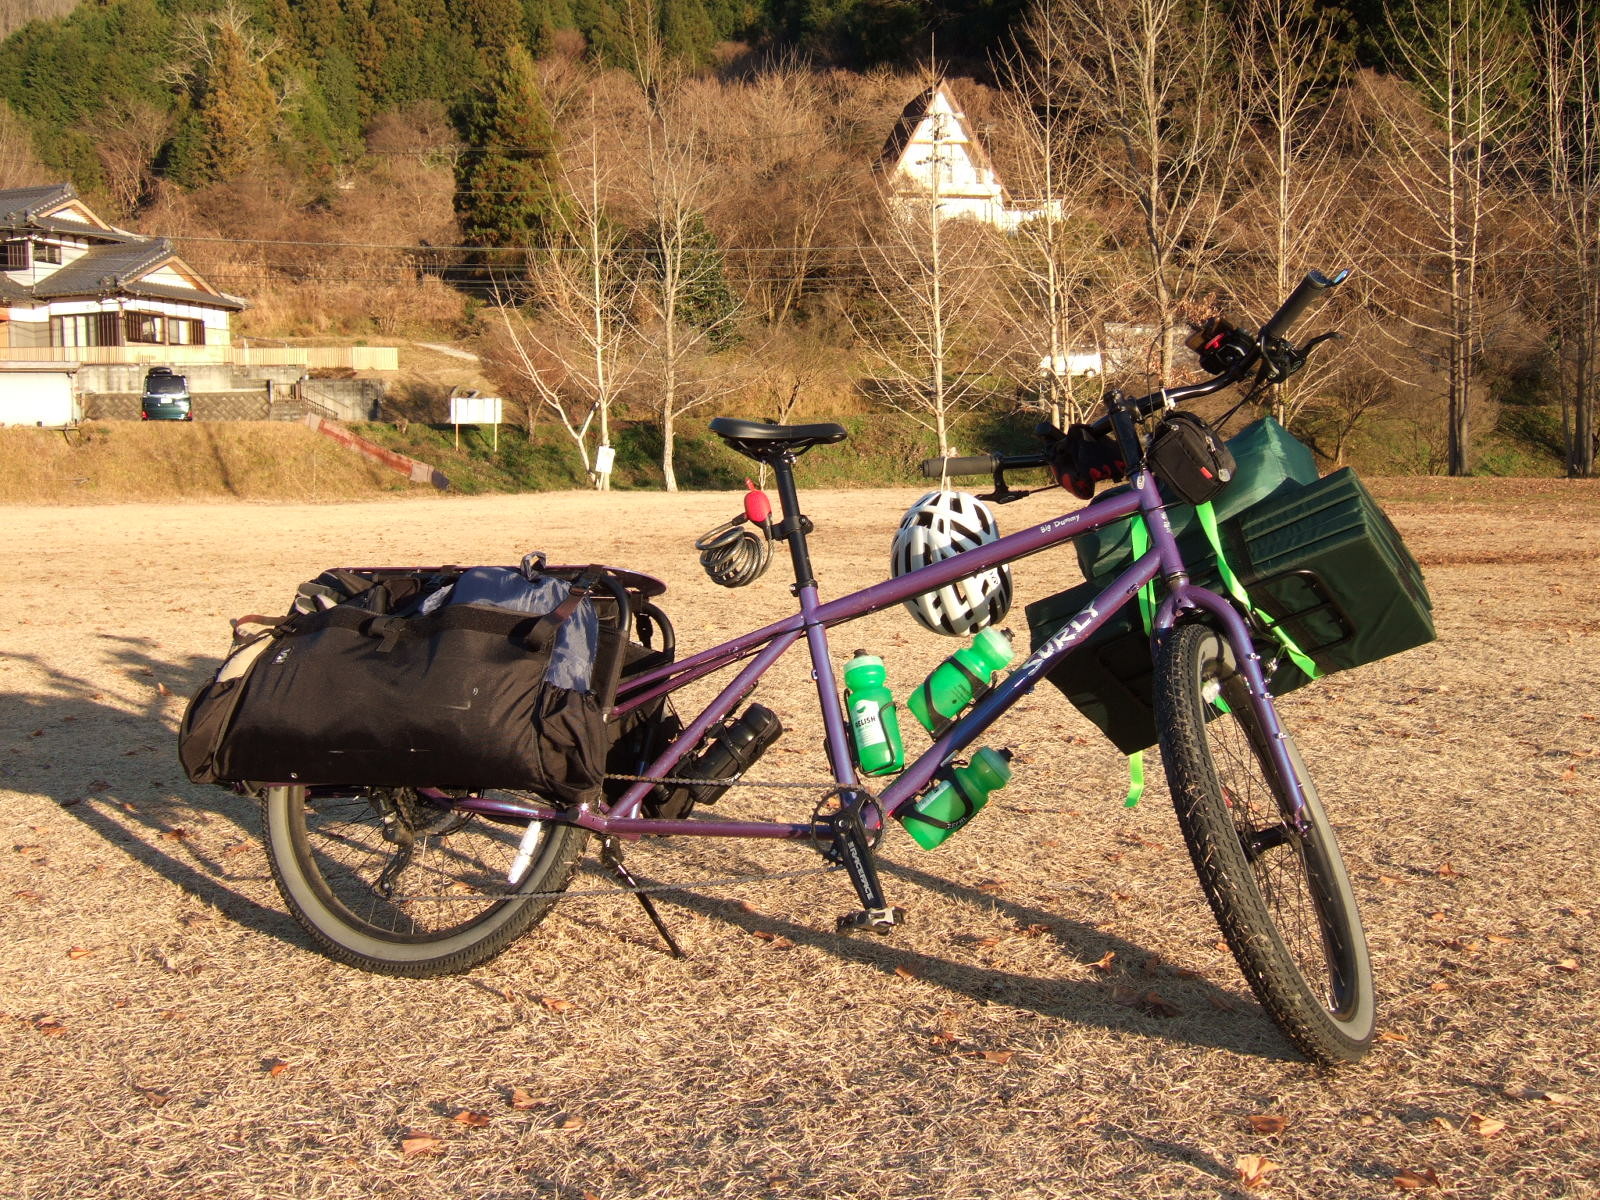 A loaded cargo bike parked on a field of close-dropped dried grass, with an A-frame house on a wooded hill in the background.